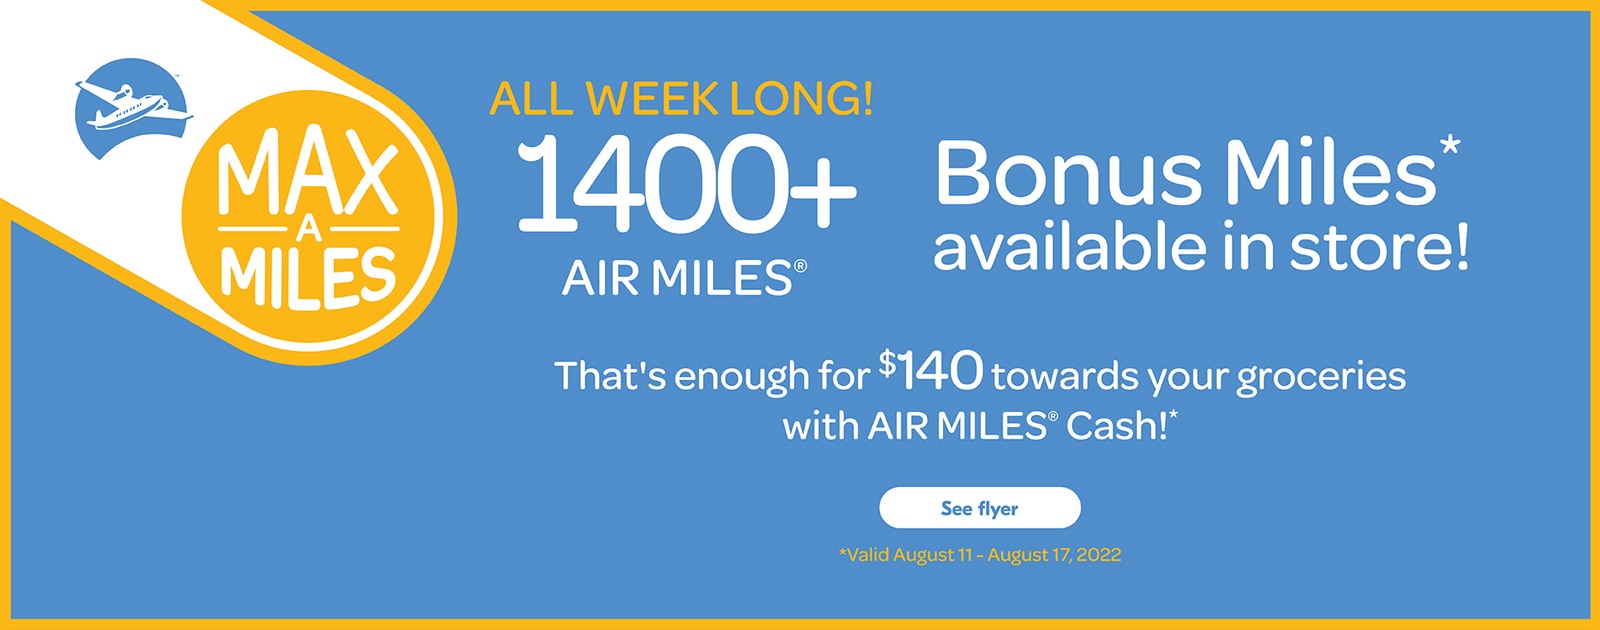 Text Reading 'Max A Miles. All week long! 1400+ Air Miles. Bonus Miles available in store! That's enough for $140 towards your groceries with Air Miles Cash! Valid from August 11, 2022 to August 17, 2022. 'See flyer' button here.'